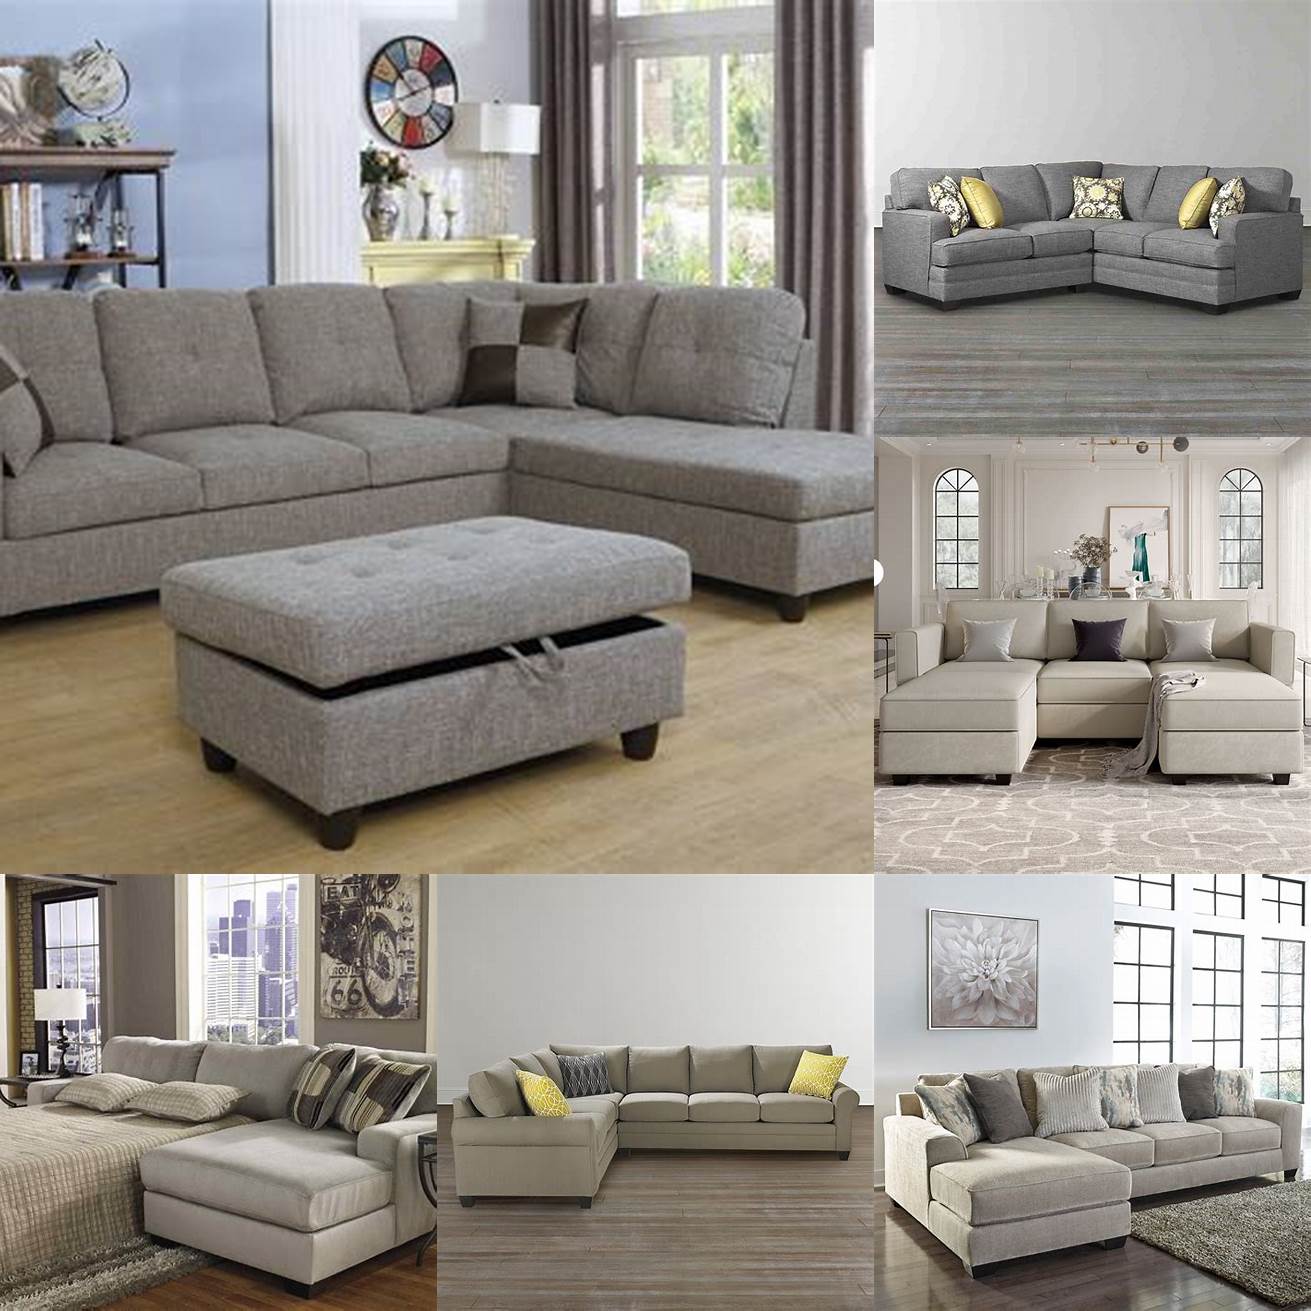 An L-shaped bedroom double that can be used as a sectional sofa as well